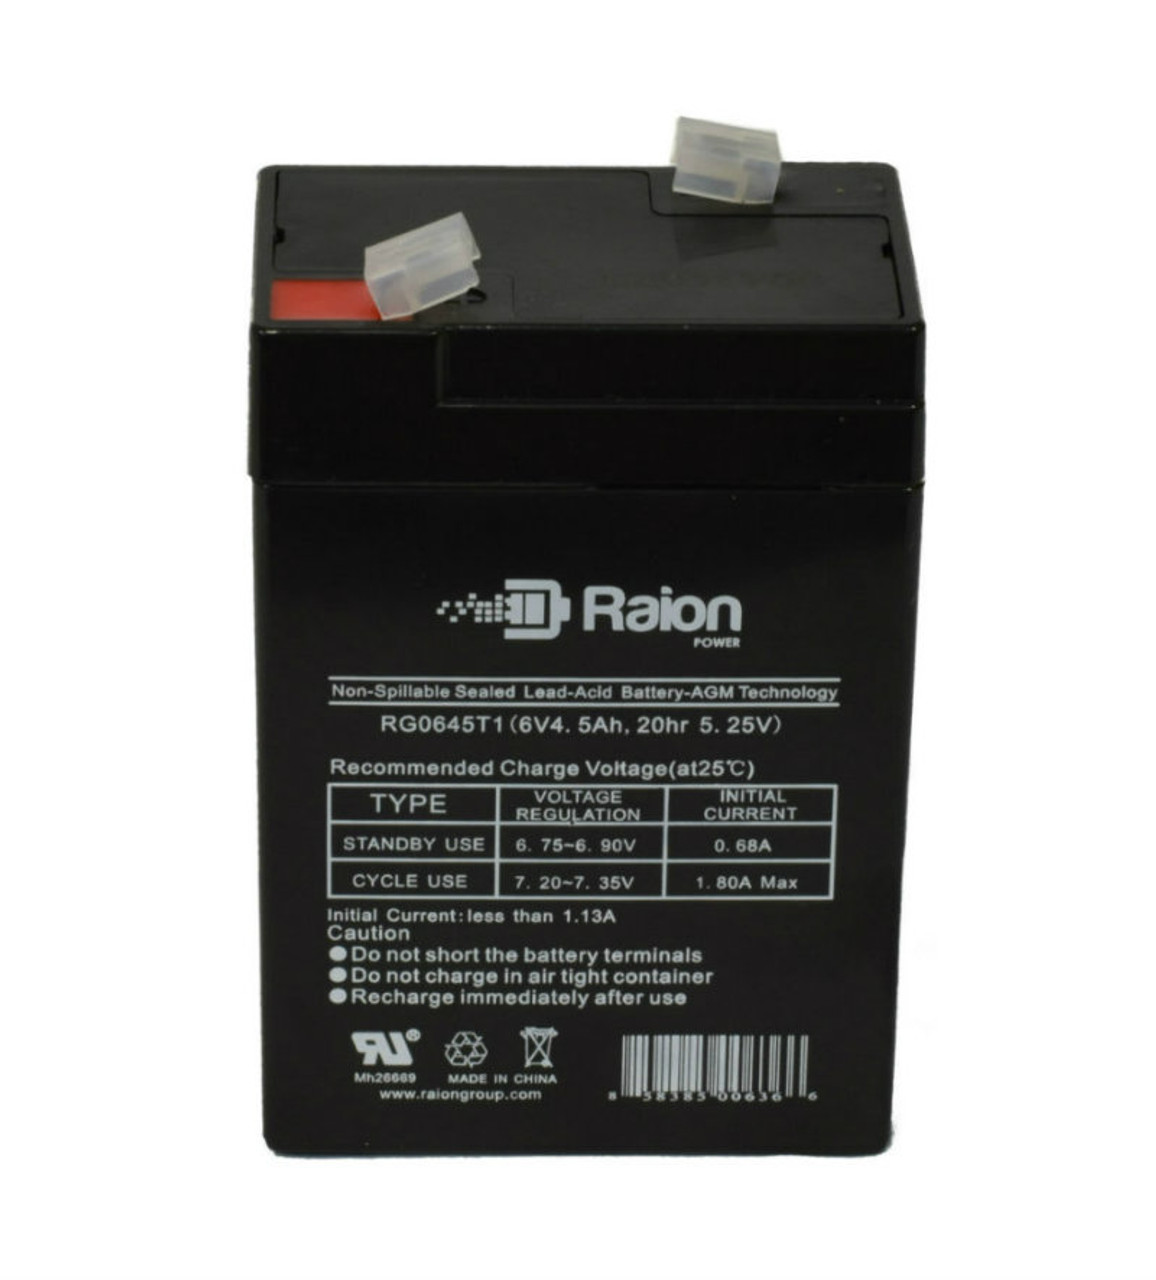 Raion Power RG0645T1 Replacement Battery Cartridge for Aokly Power 3-FM-4.5